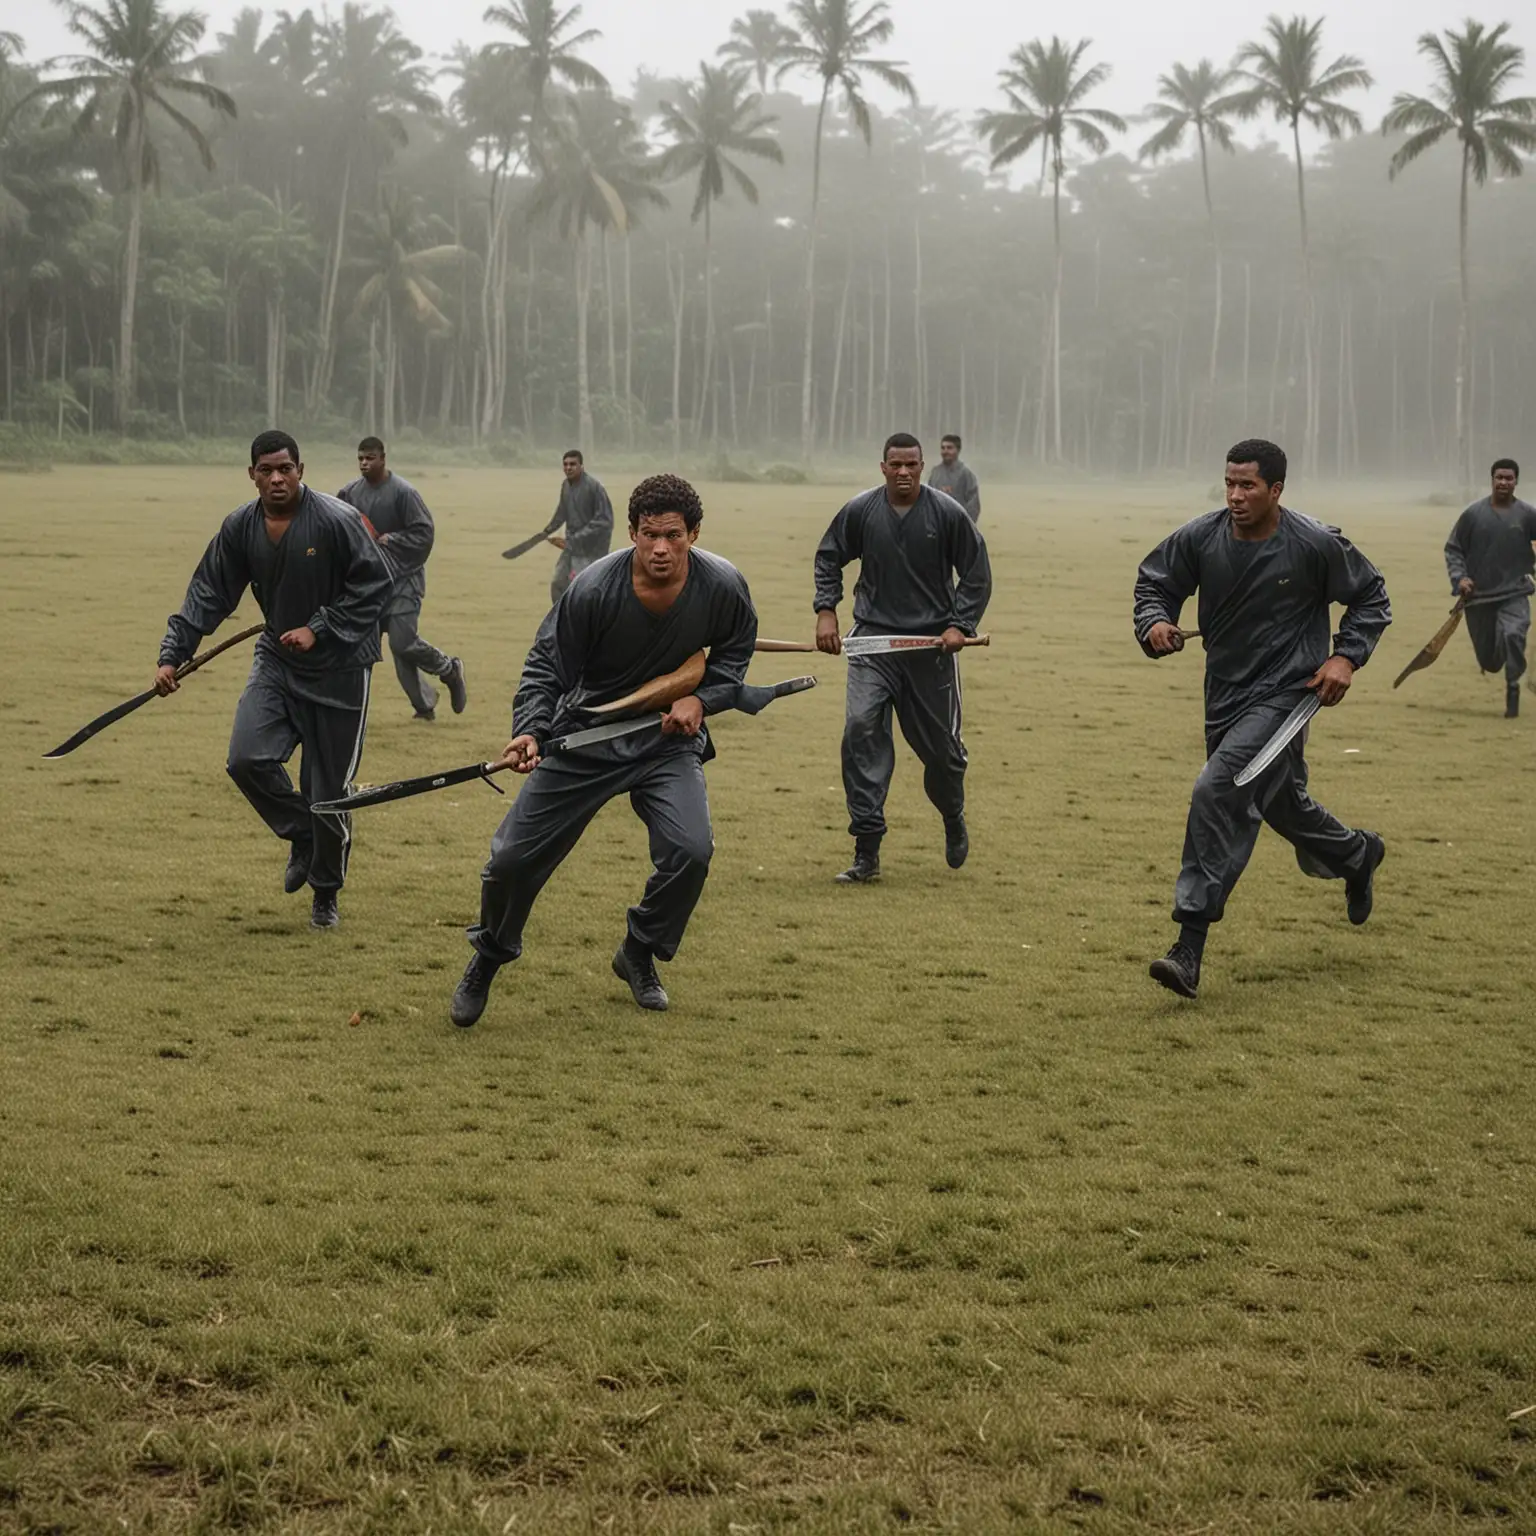 Intense Pursuit Joggers with Machetes in Tropical Football Field